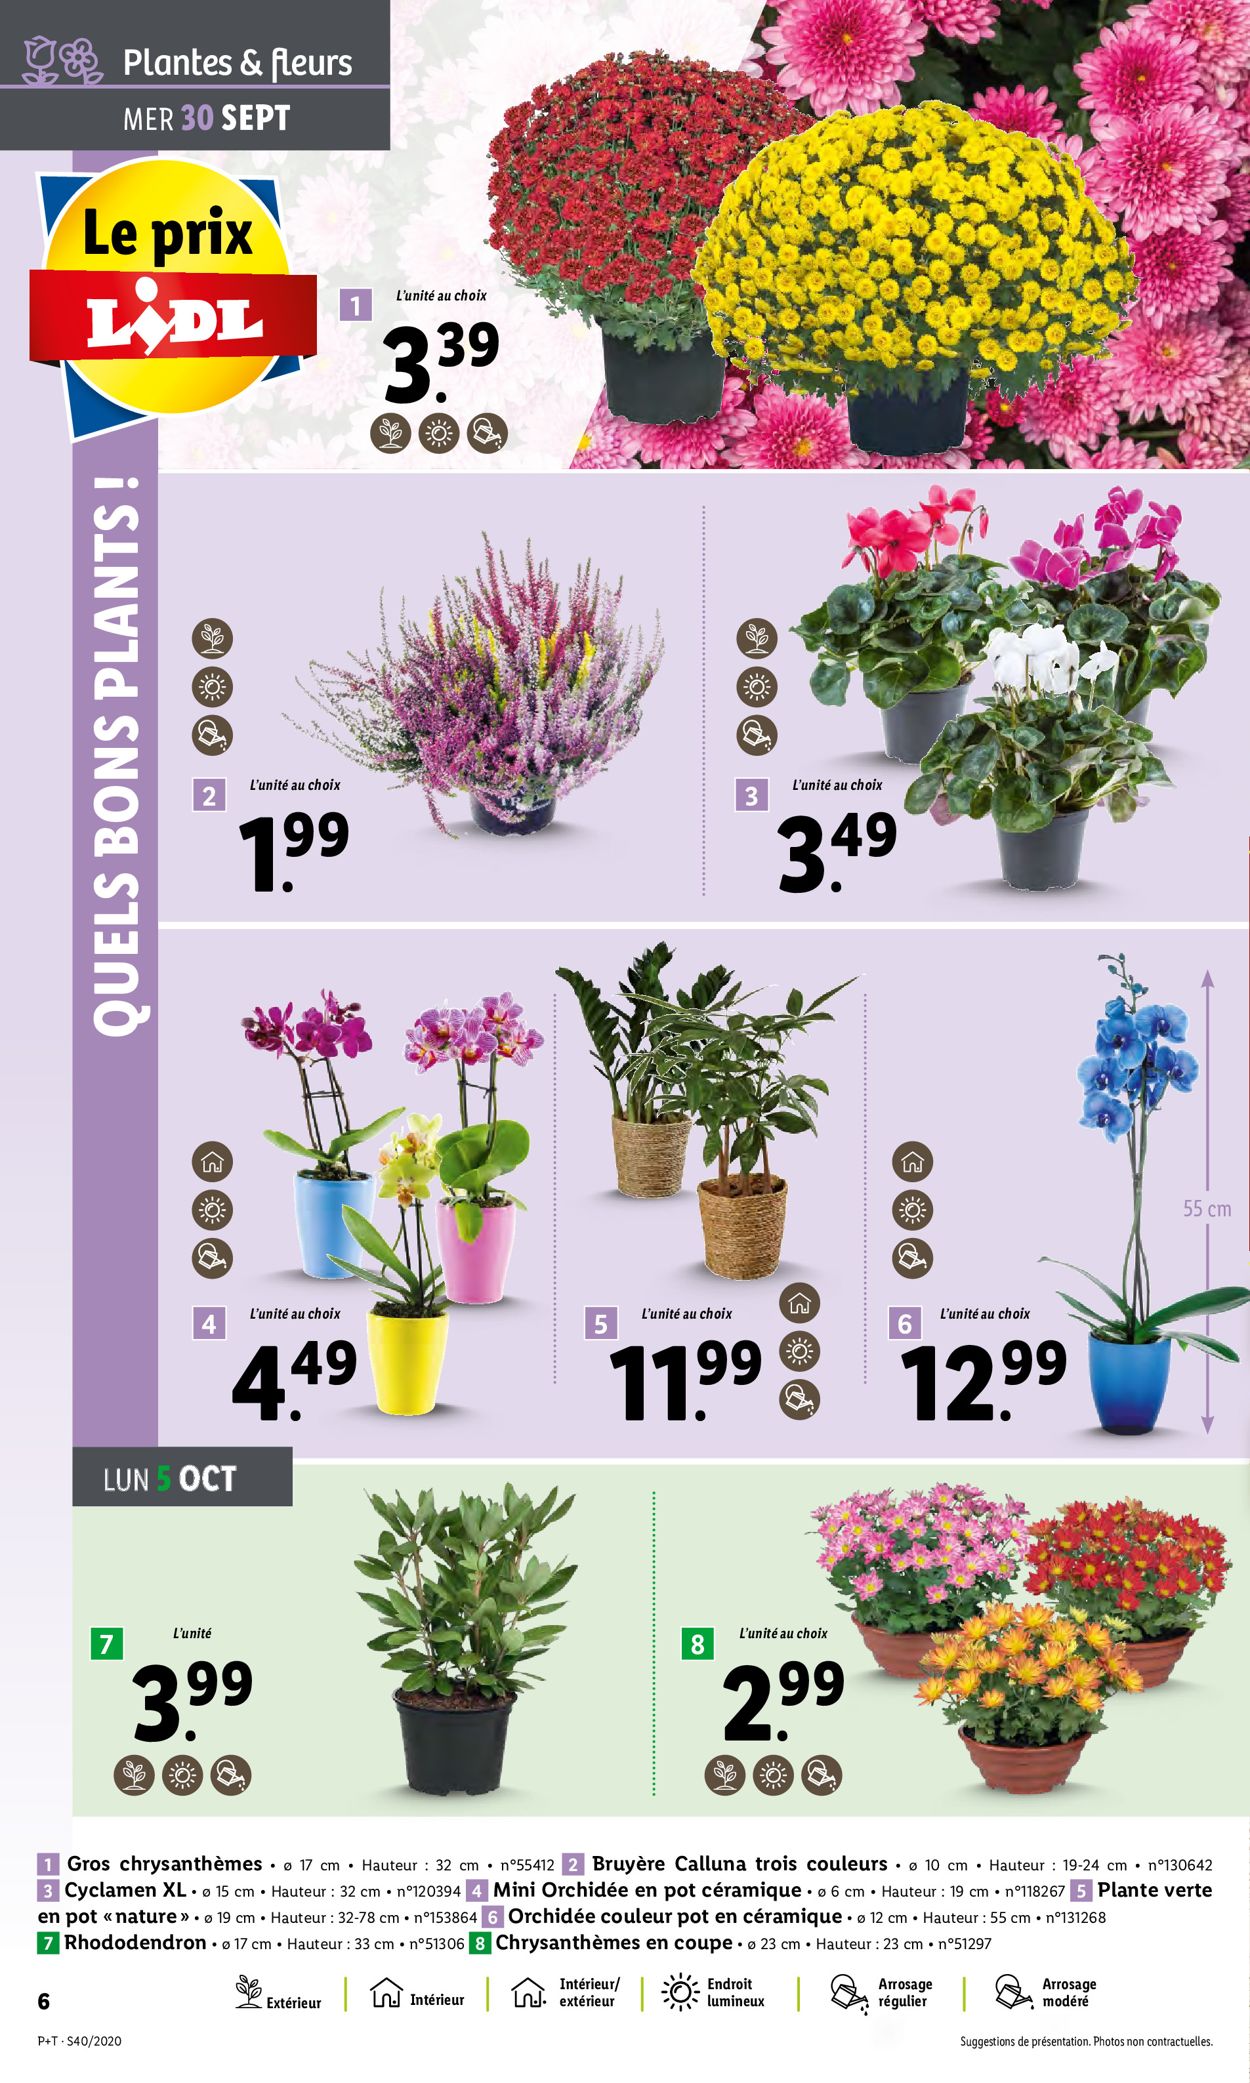 Lidl Catalogue - 30.09-06.10.2020 (Page 6)